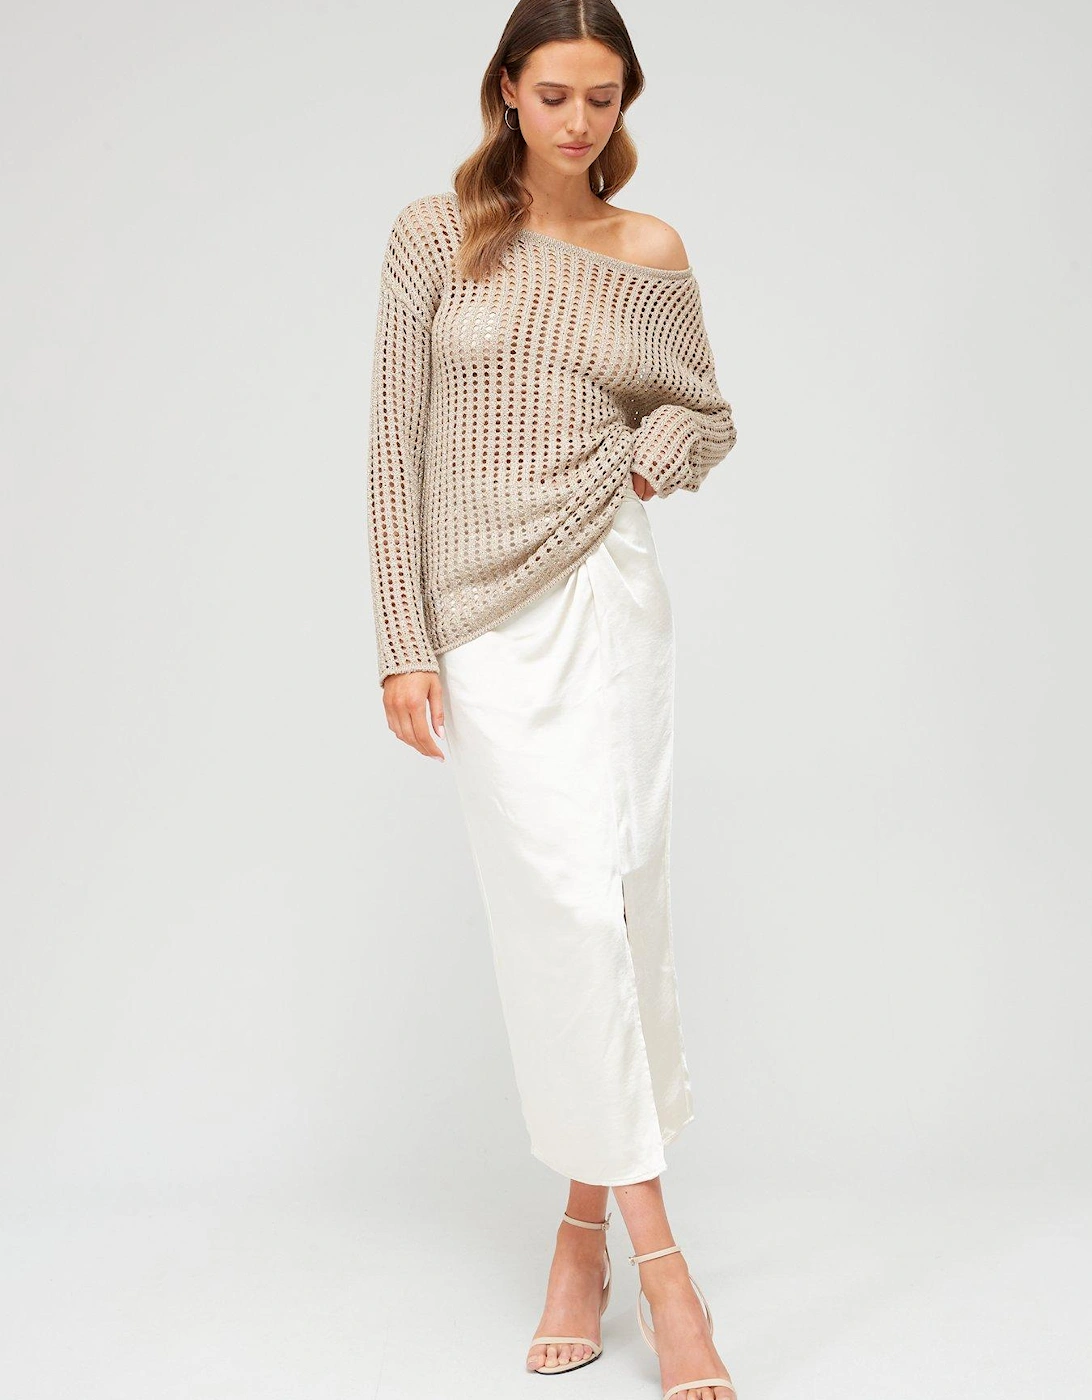 Ruched Midaxi Skirt - White